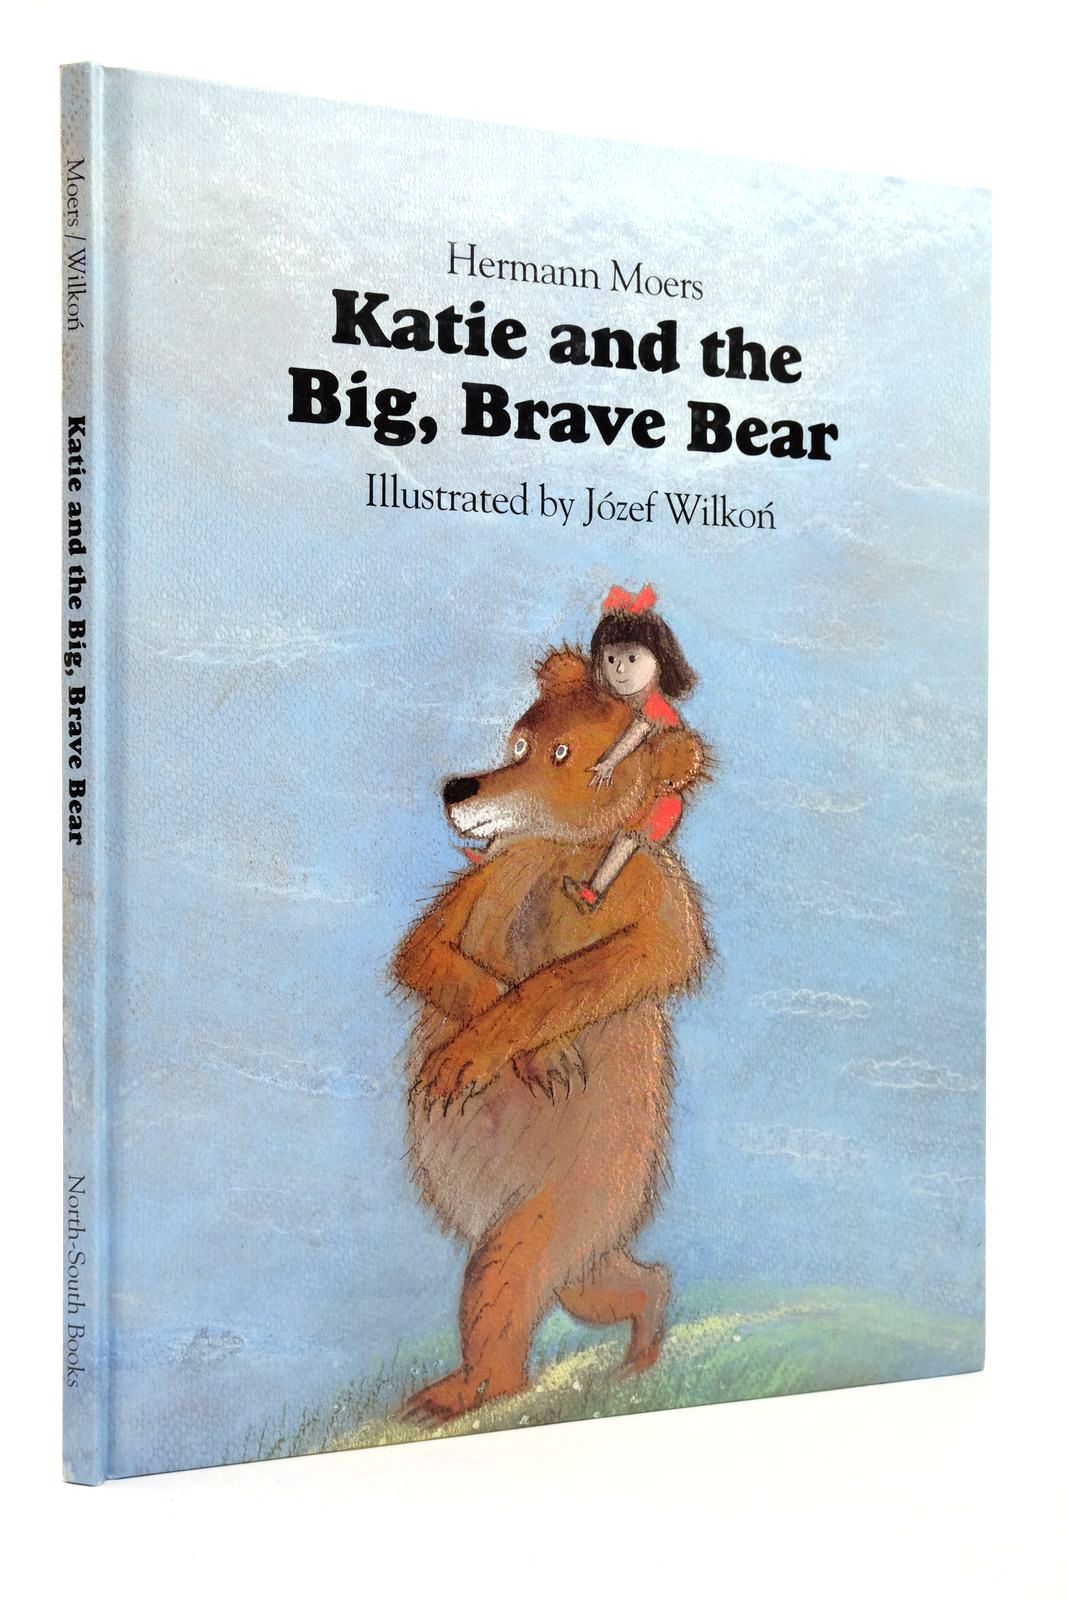 Photo of KATIE AND THE BIG, BRAVE BEAR written by Moers, Hermann illustrated by Wilkon, Jozef published by North-South Books (STOCK CODE: 2138617)  for sale by Stella & Rose's Books